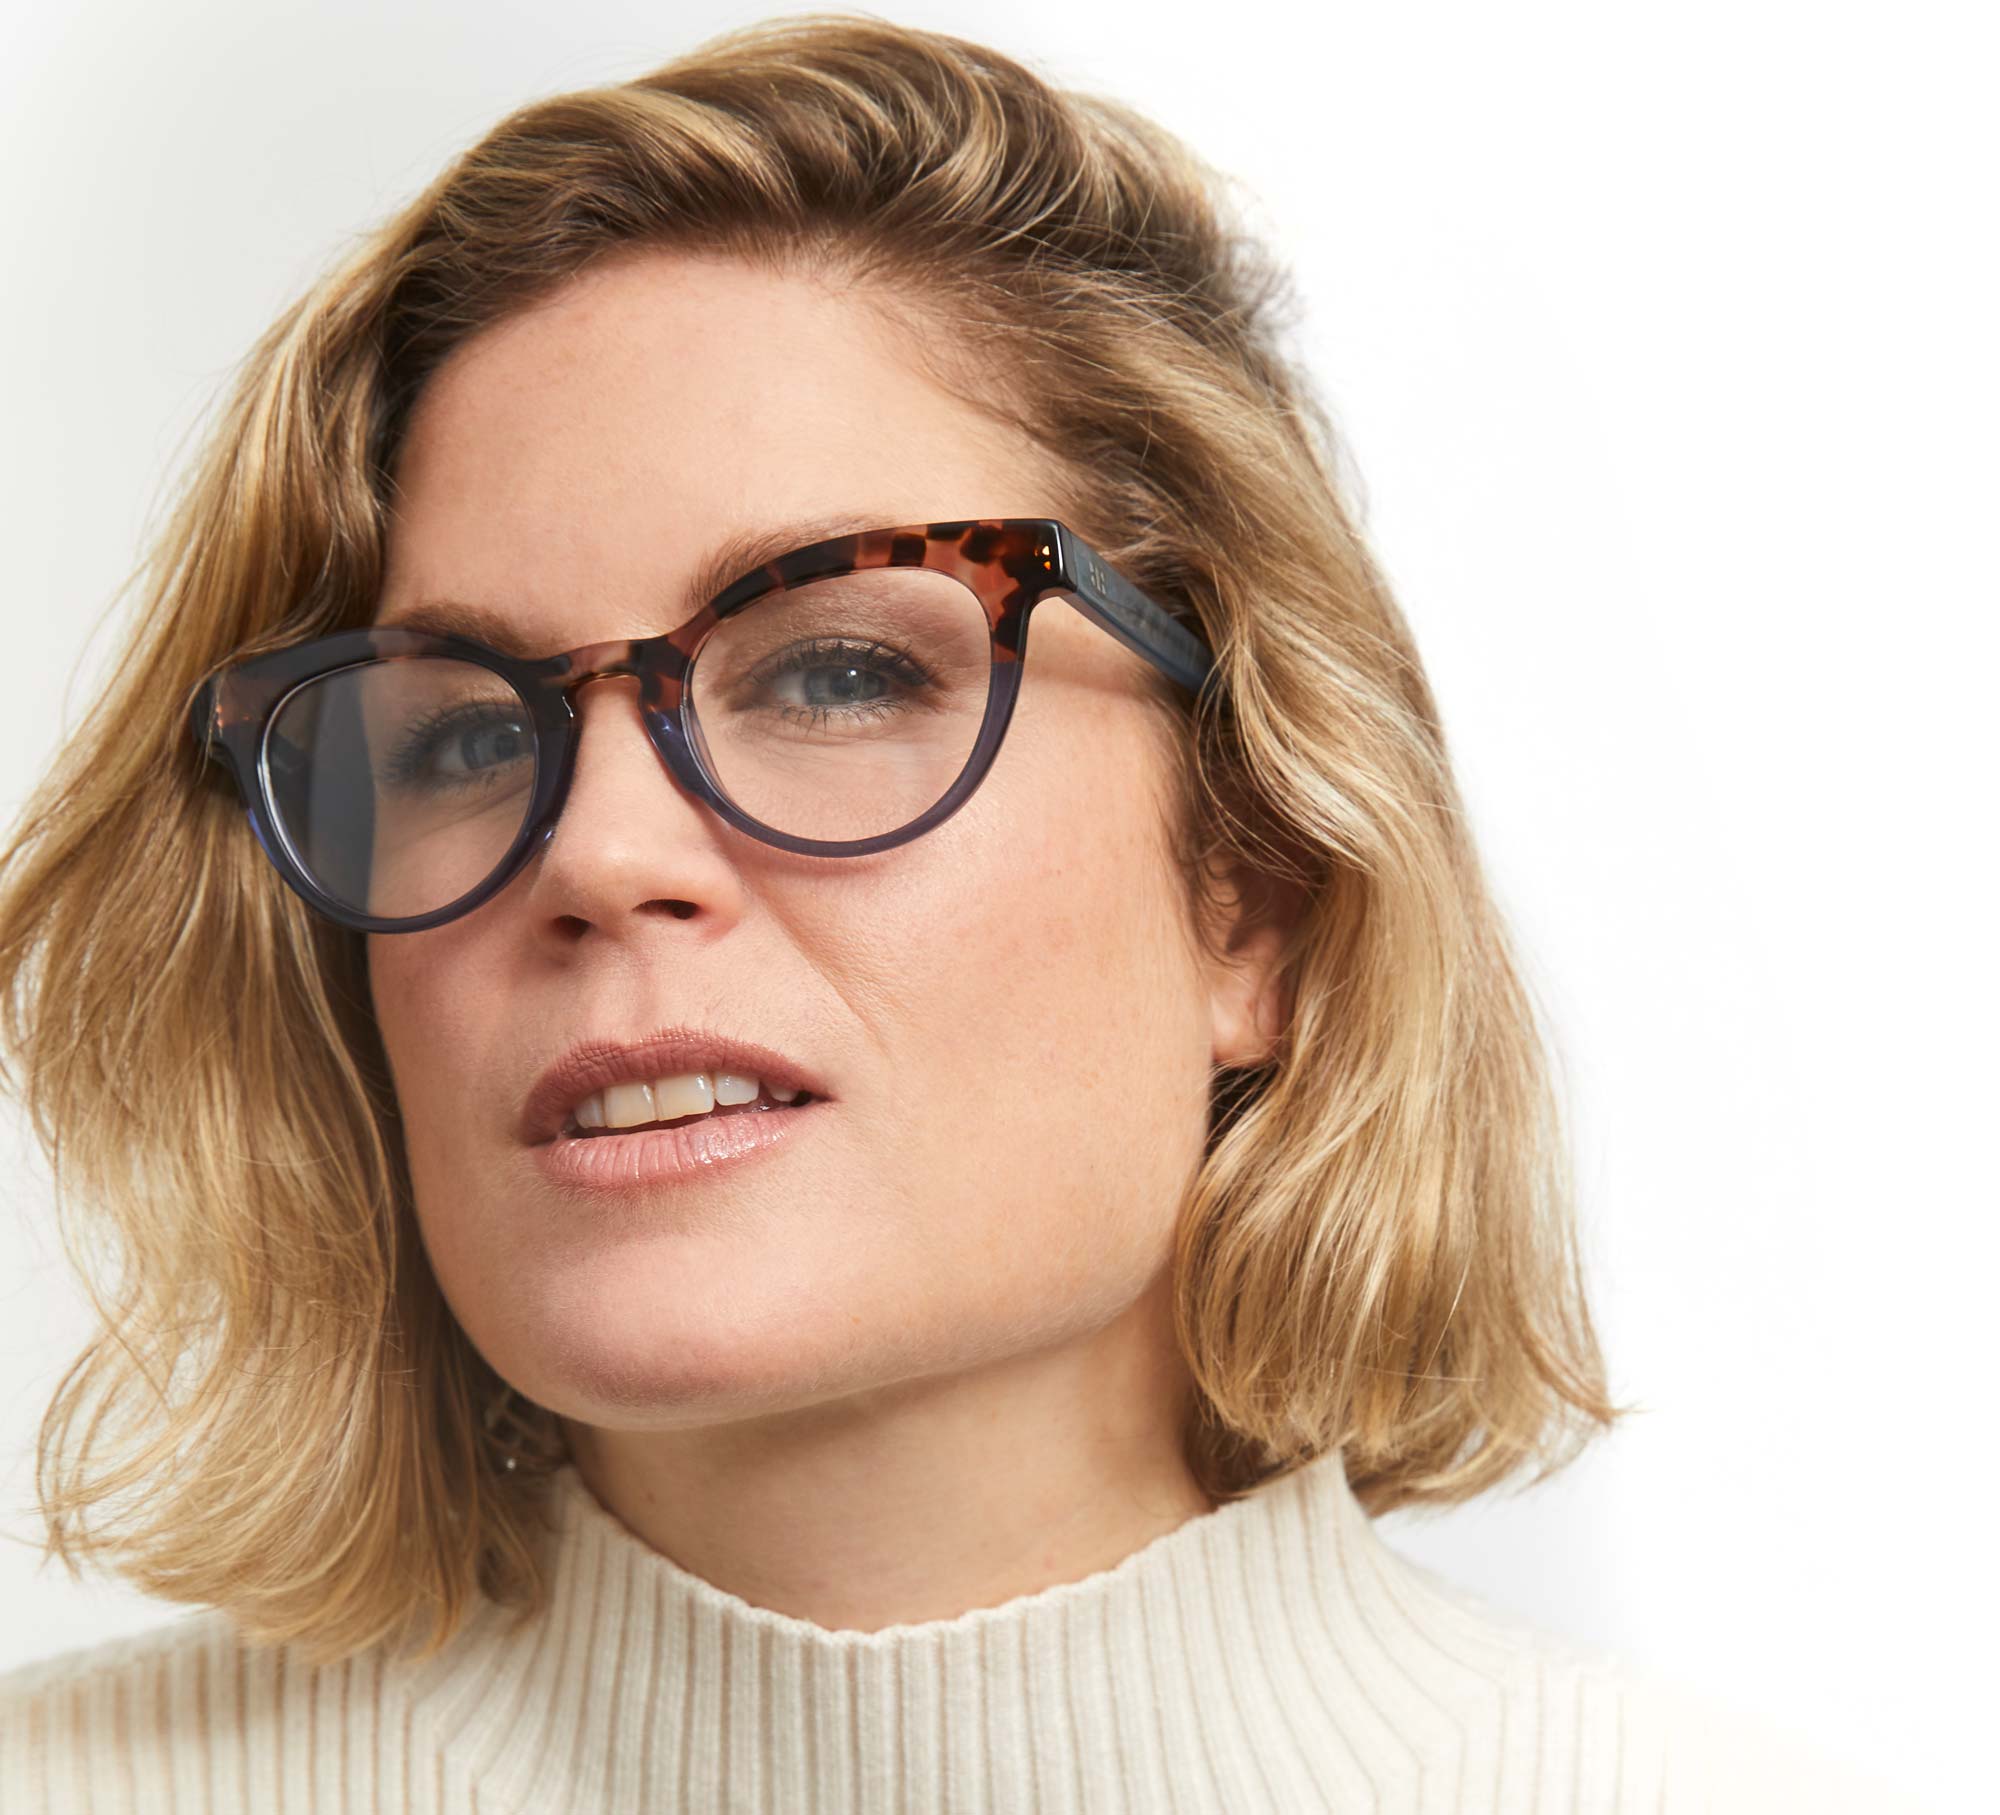 Photo of a man or woman wearing Céline Black & Tortoise Reading Glasses by French Kiwis